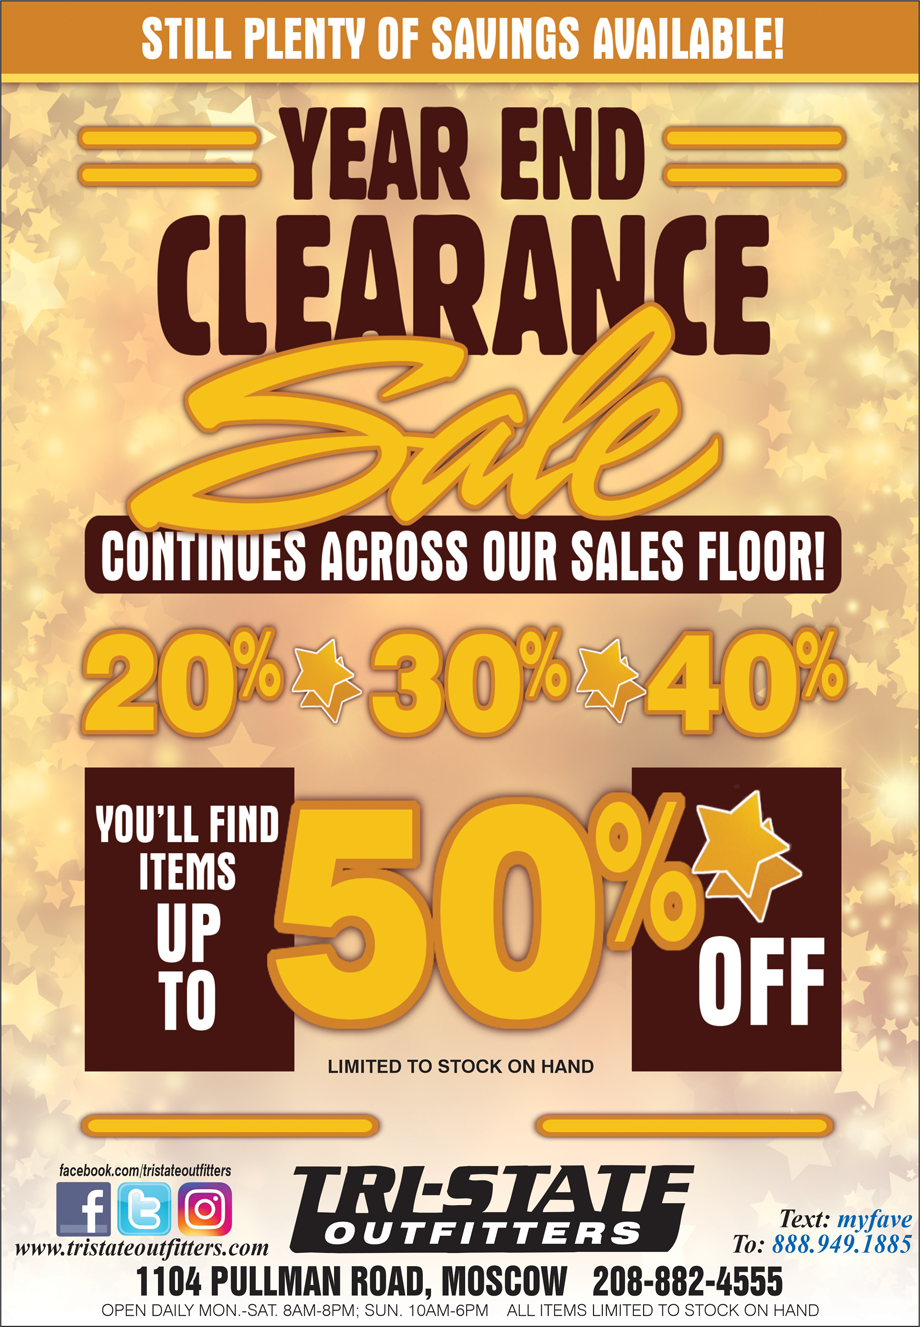 Moscow – Year End Clearance